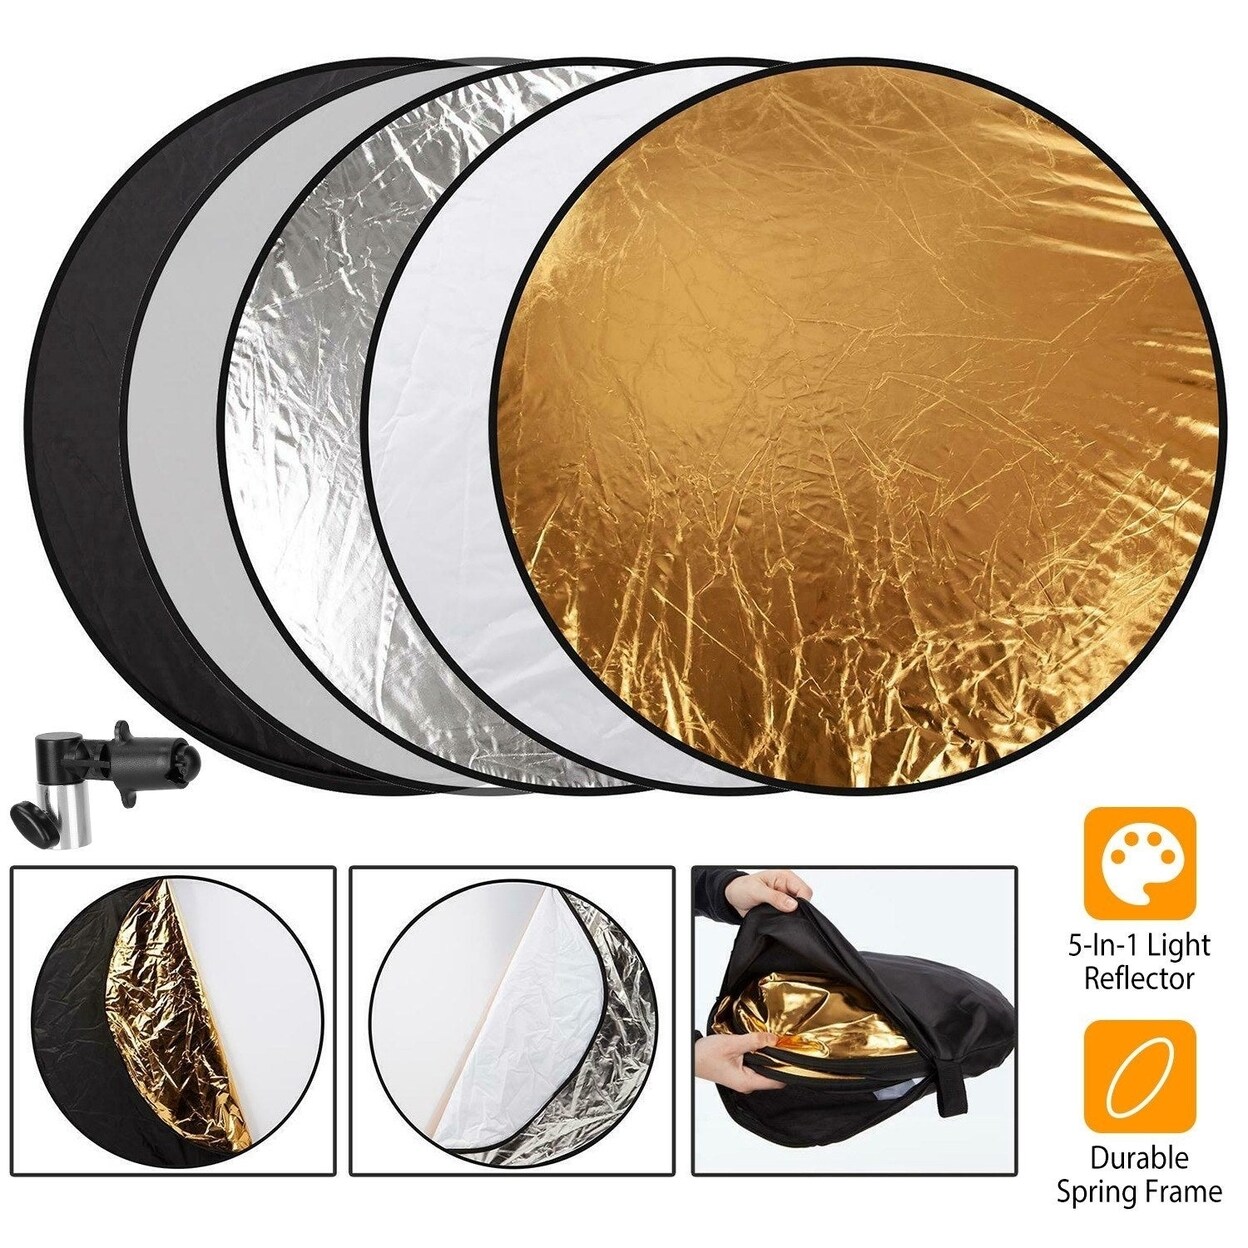 SKUSHOPS 5 In 1 Photography Round Light Reflector Collapsible Multi Disc Light Diffuser with Storage Bag Translucent Silver Gold